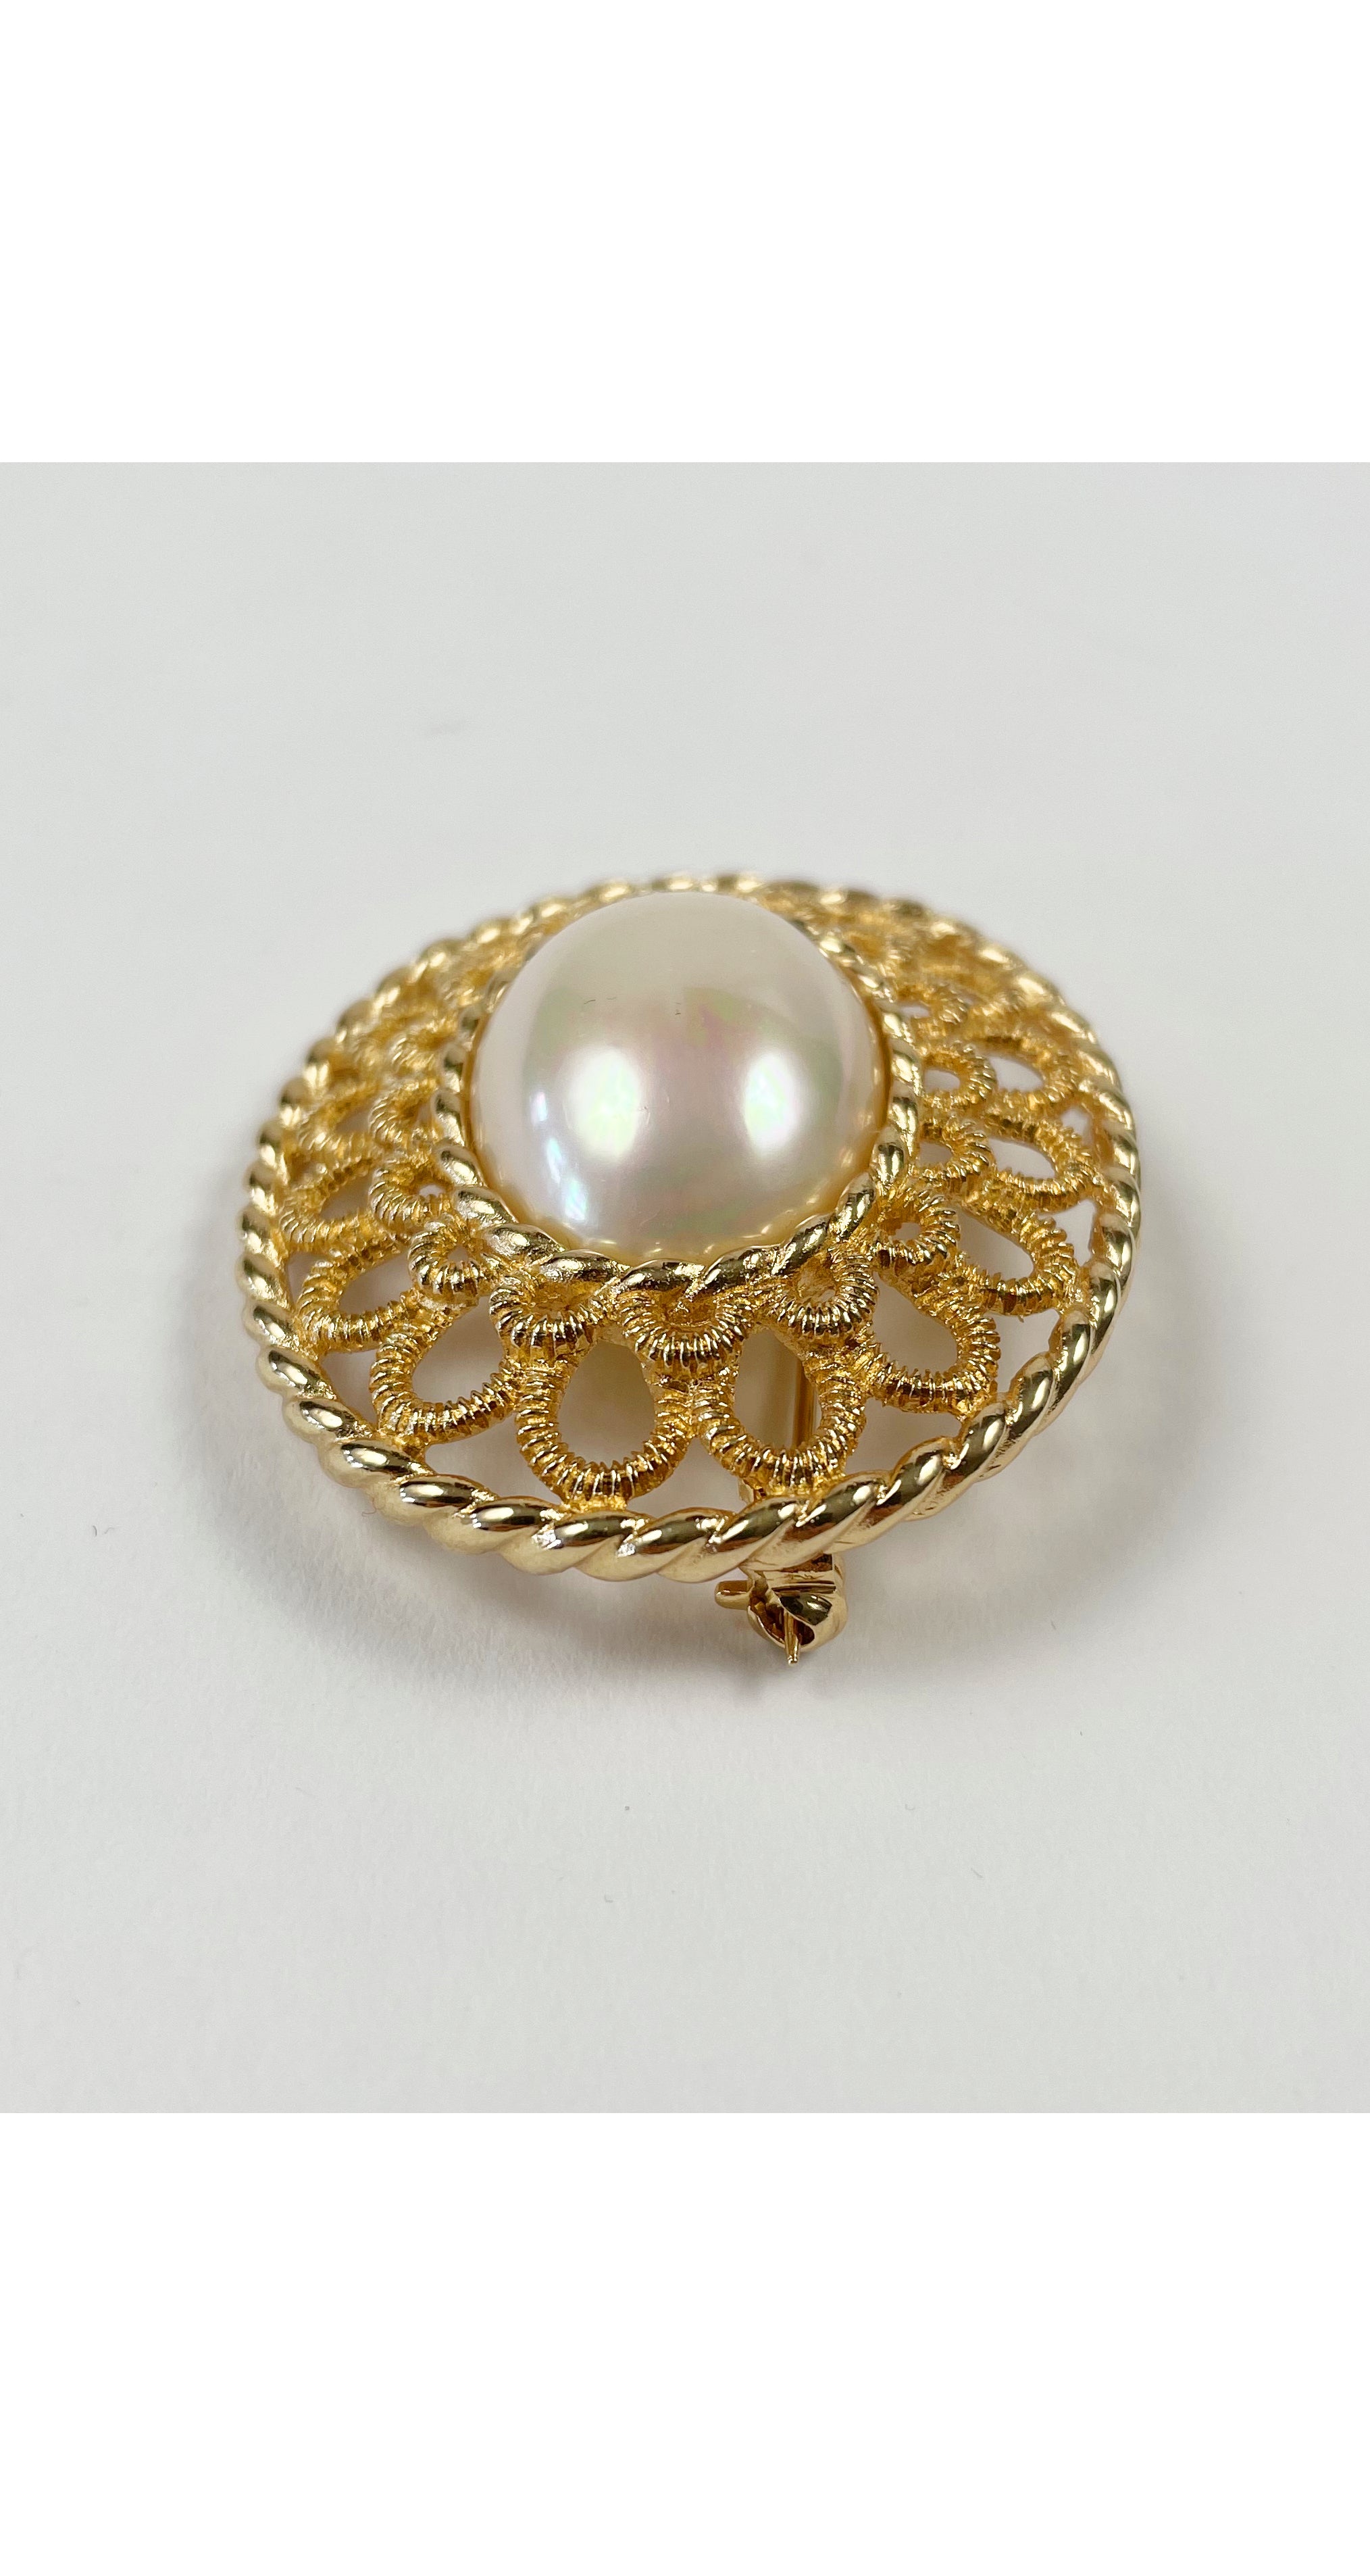 1980s Iridescent Faux Pearl Gold-Tone Brooch